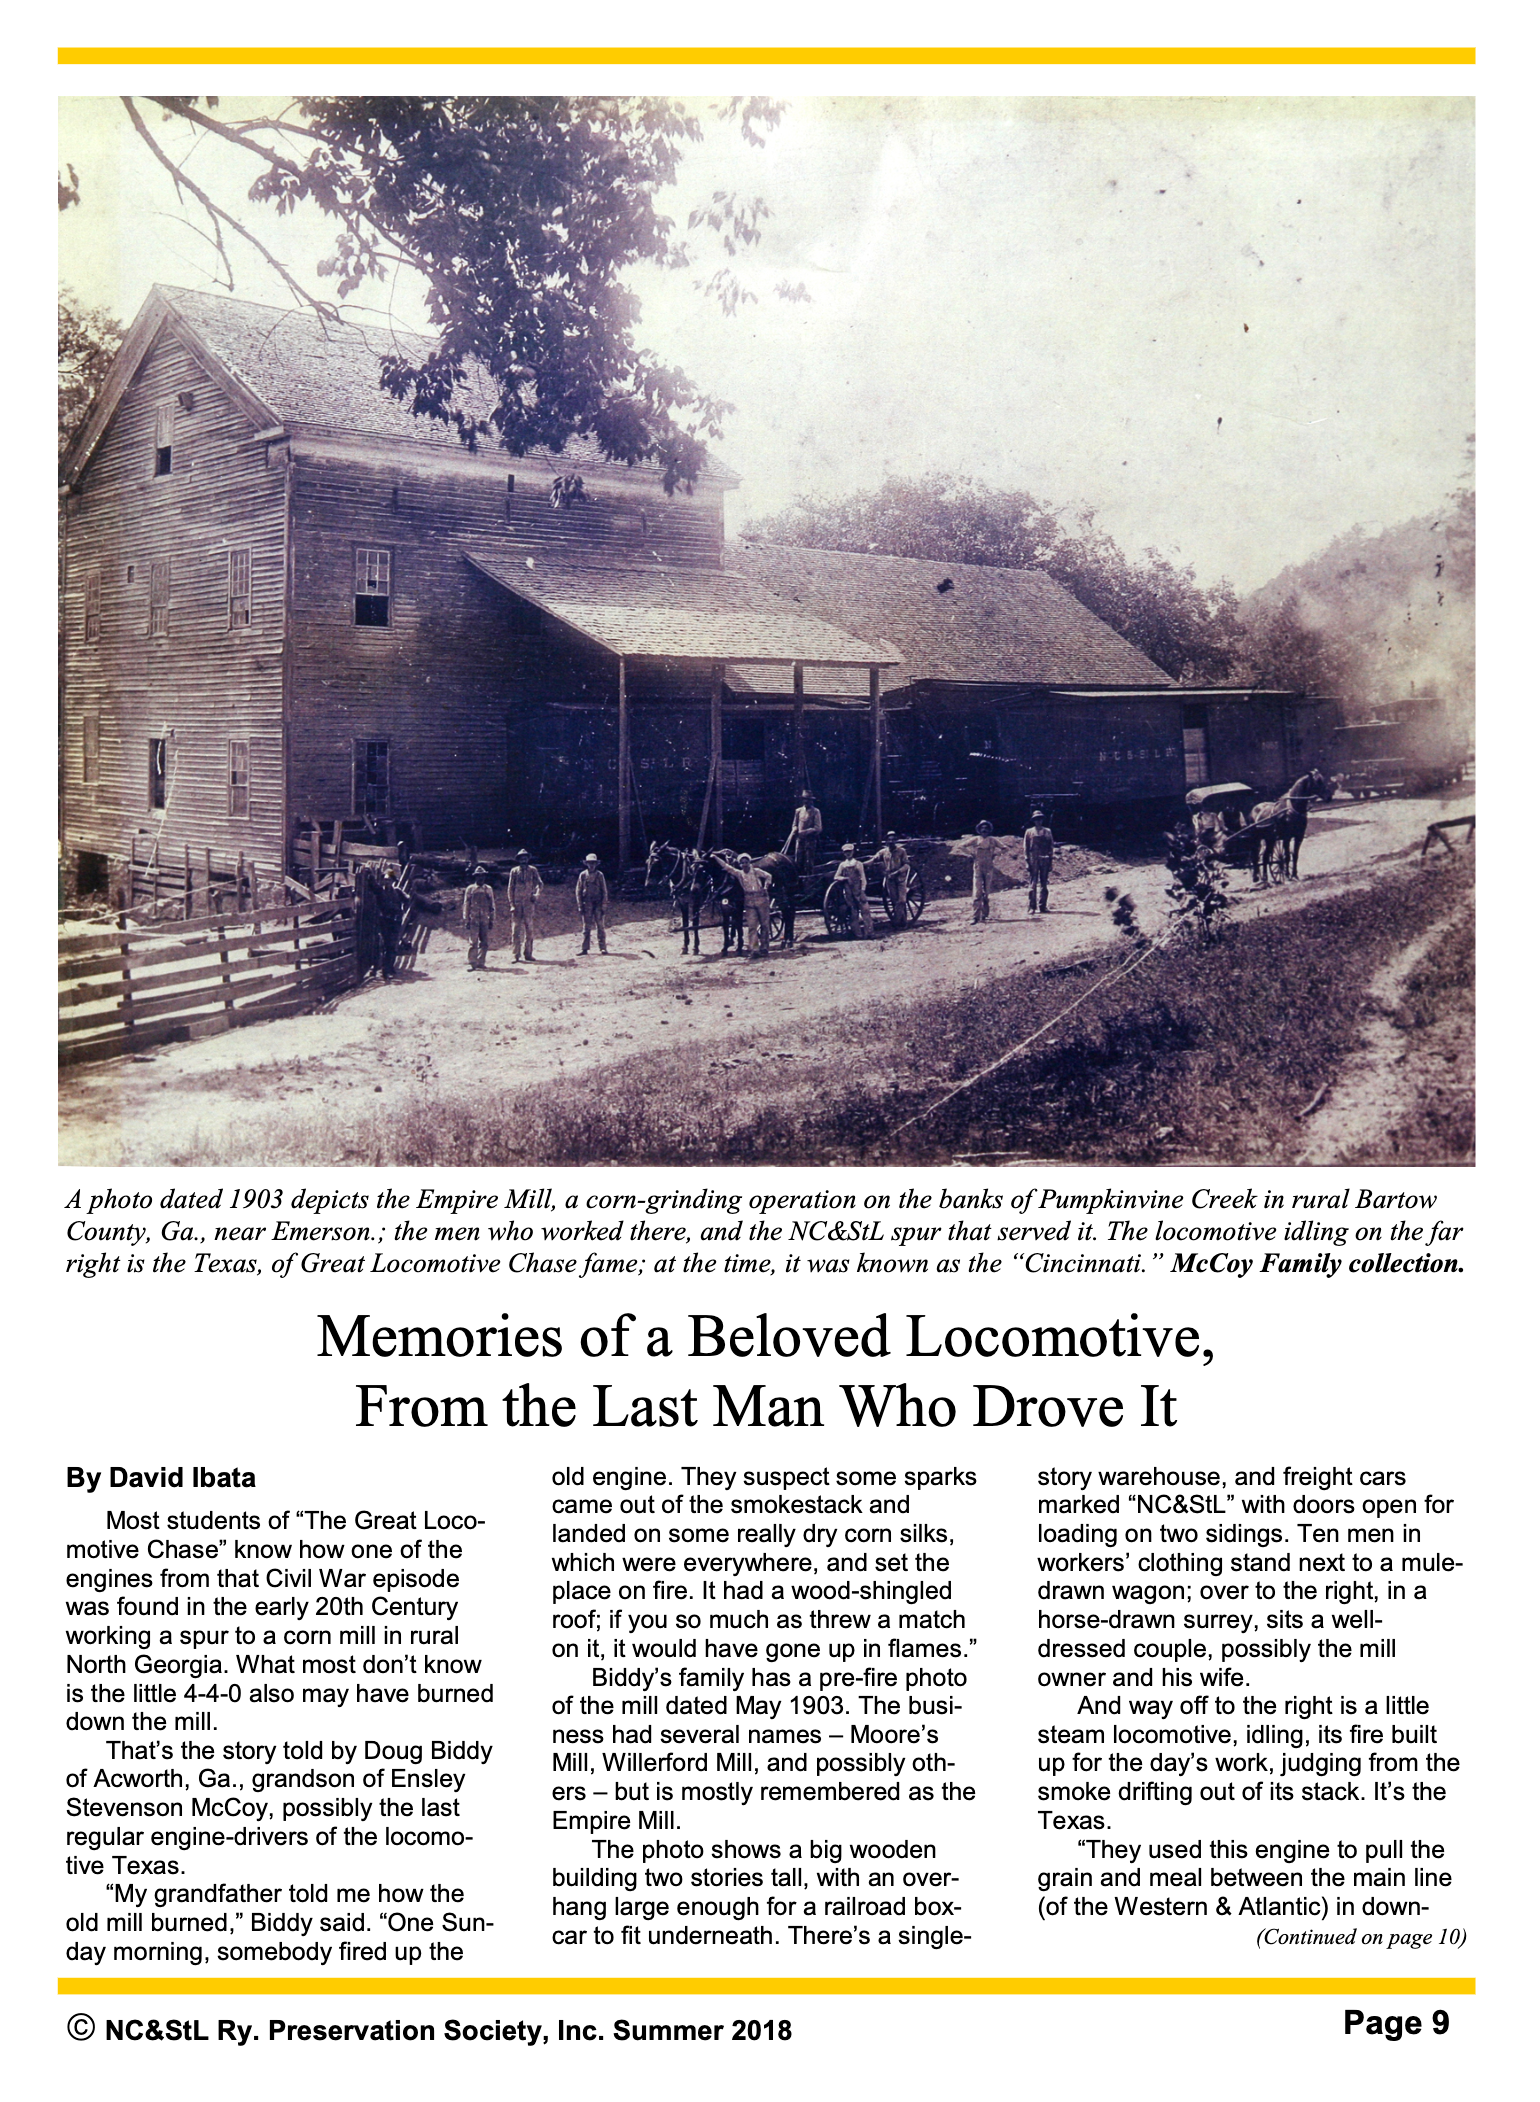 Memories of a Beloved Locomotive, From the Last Man Who Drove It (Empire Mill)